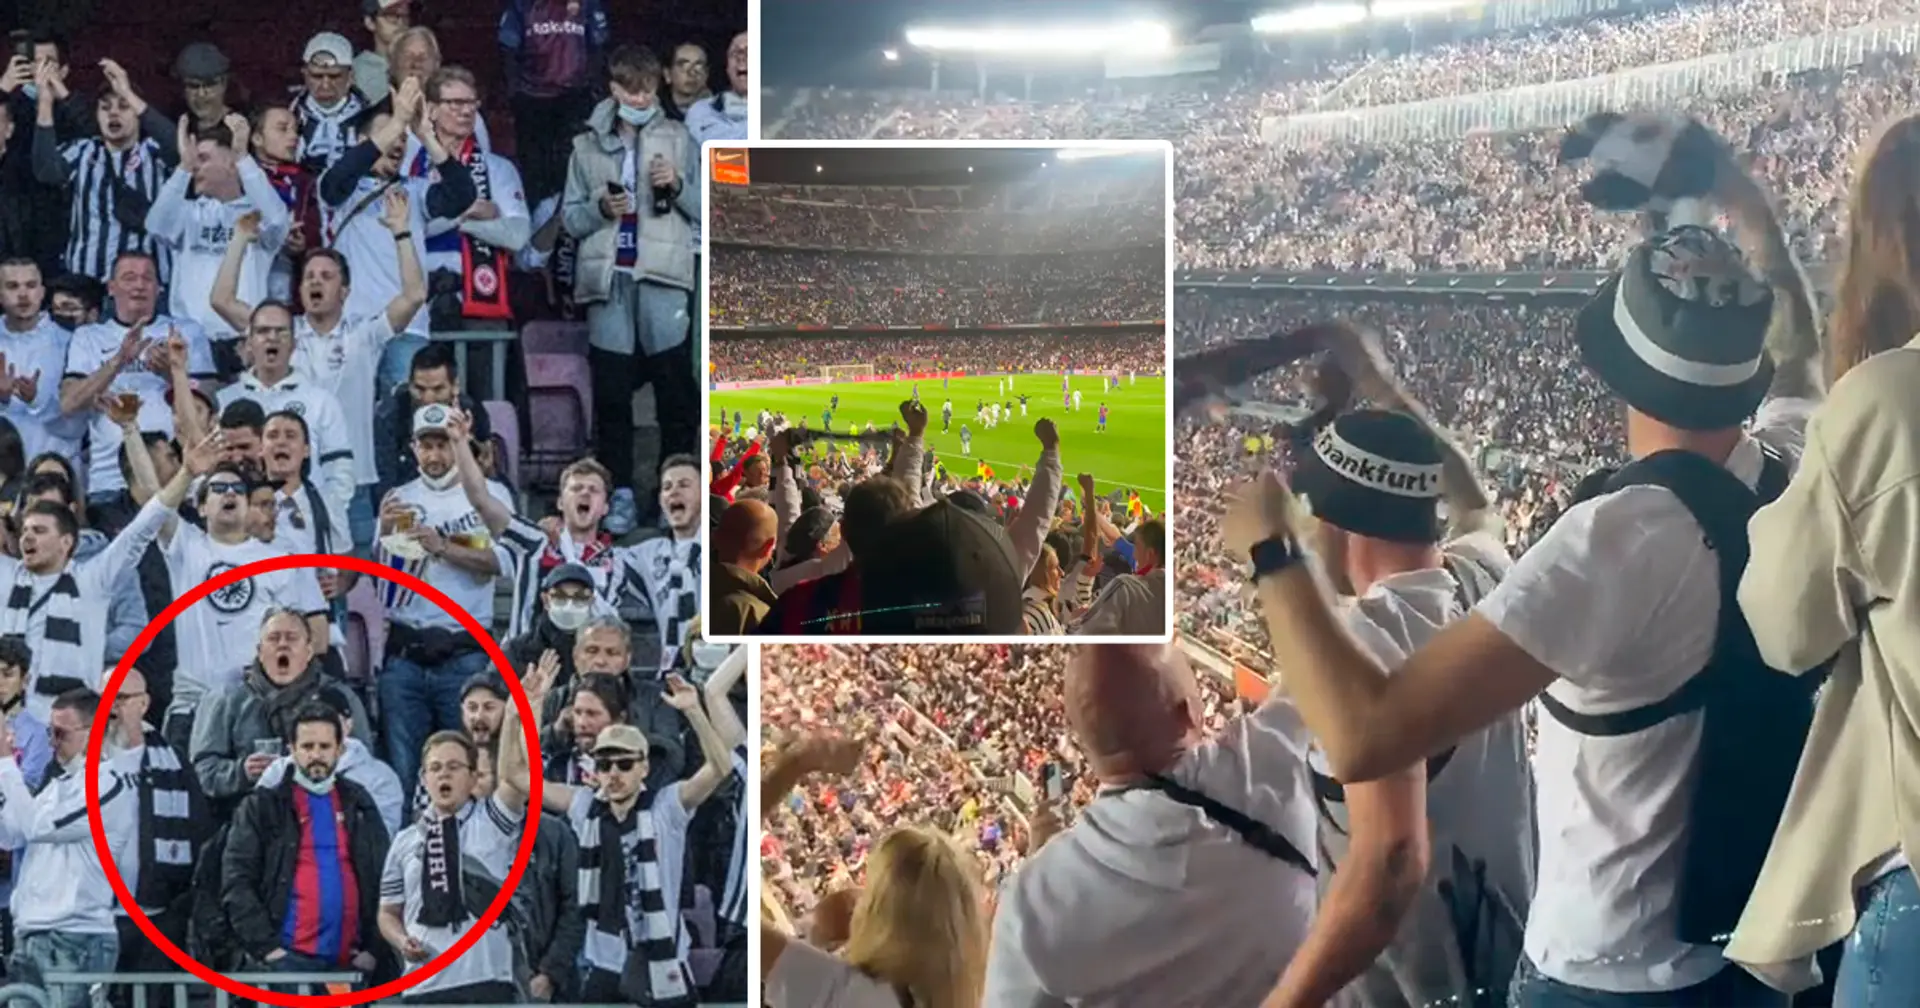 Eintracht fans take over Camp Nou, up to 30,000 away fans in the stands